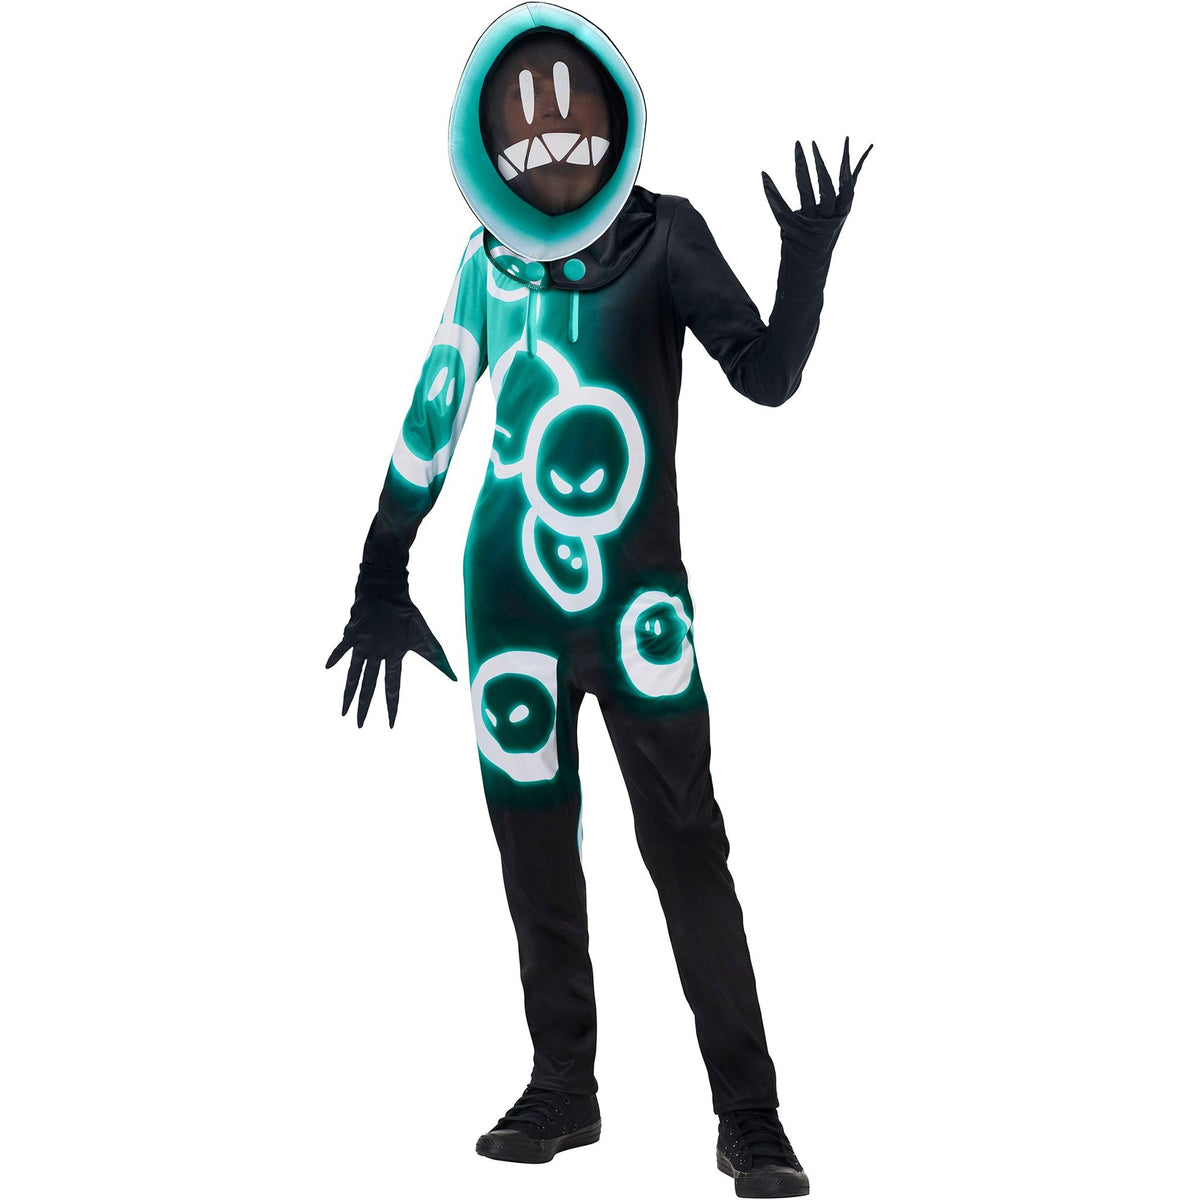 IN SPIRIT DESIGNS Costumes Grimey Costume for Kids, Fortnite, Black and Blue Jumpsuit With Hood